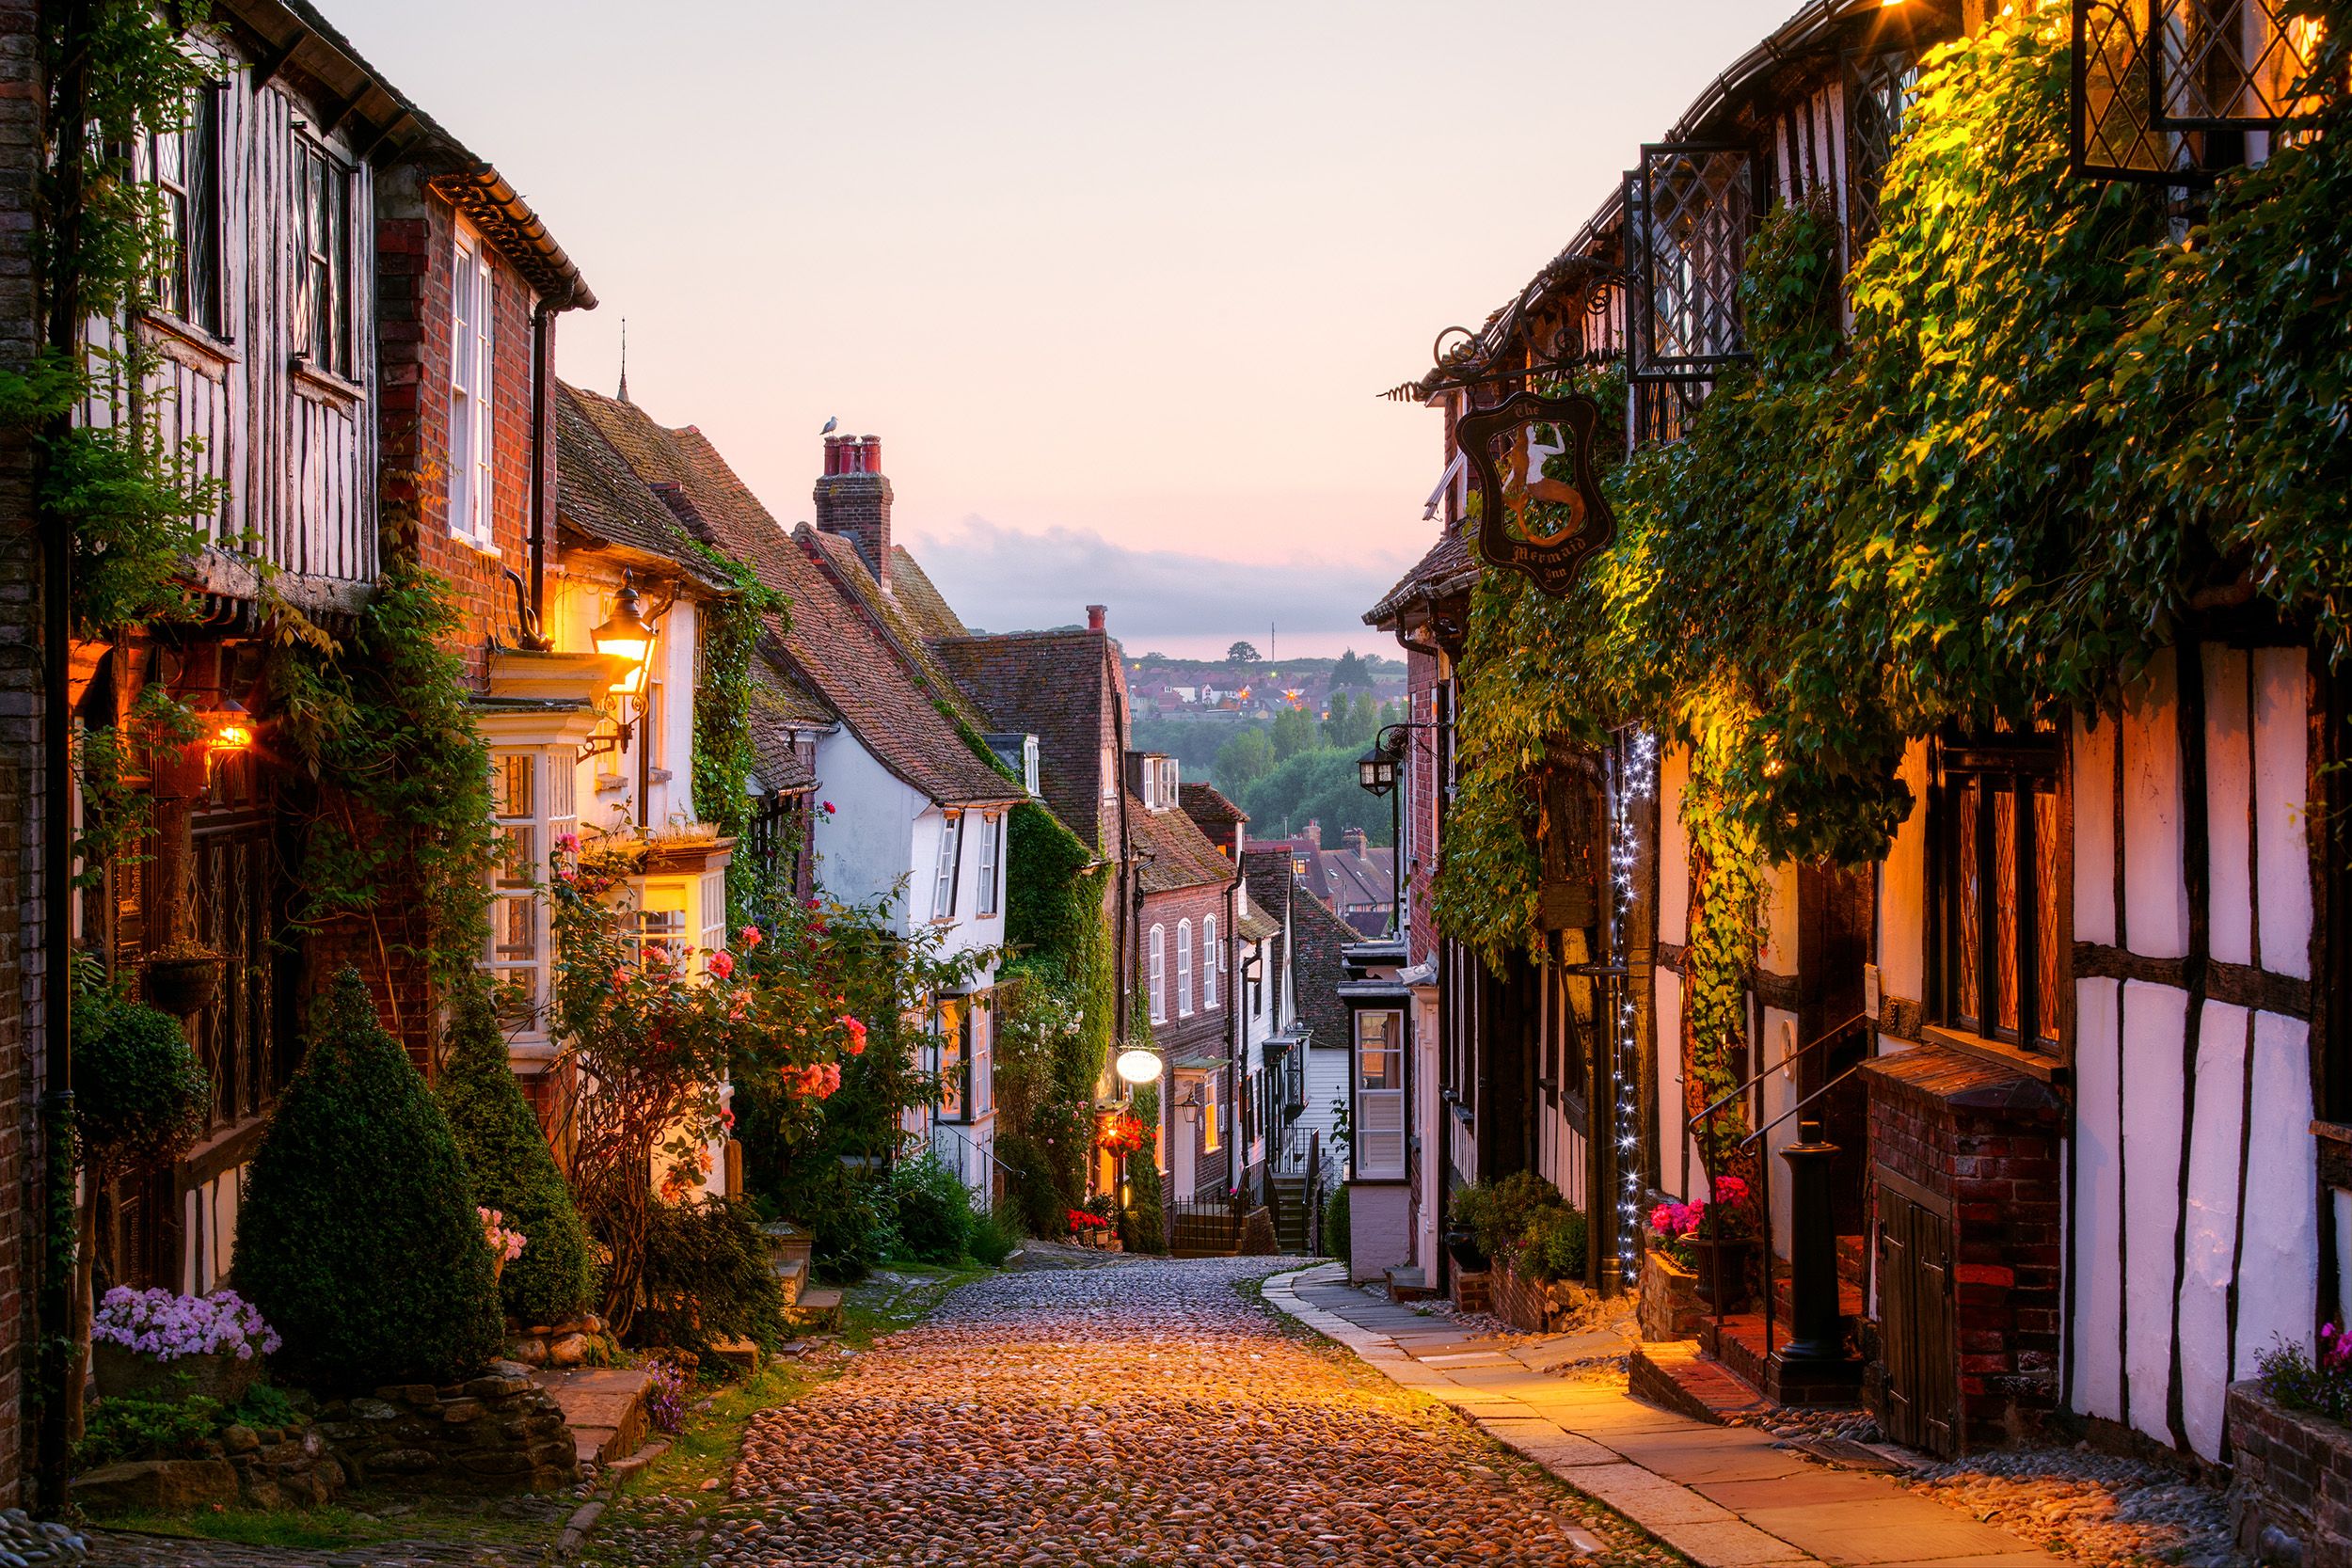 10 ways to have a stylish weekend in Rye, East Sussex in 2022